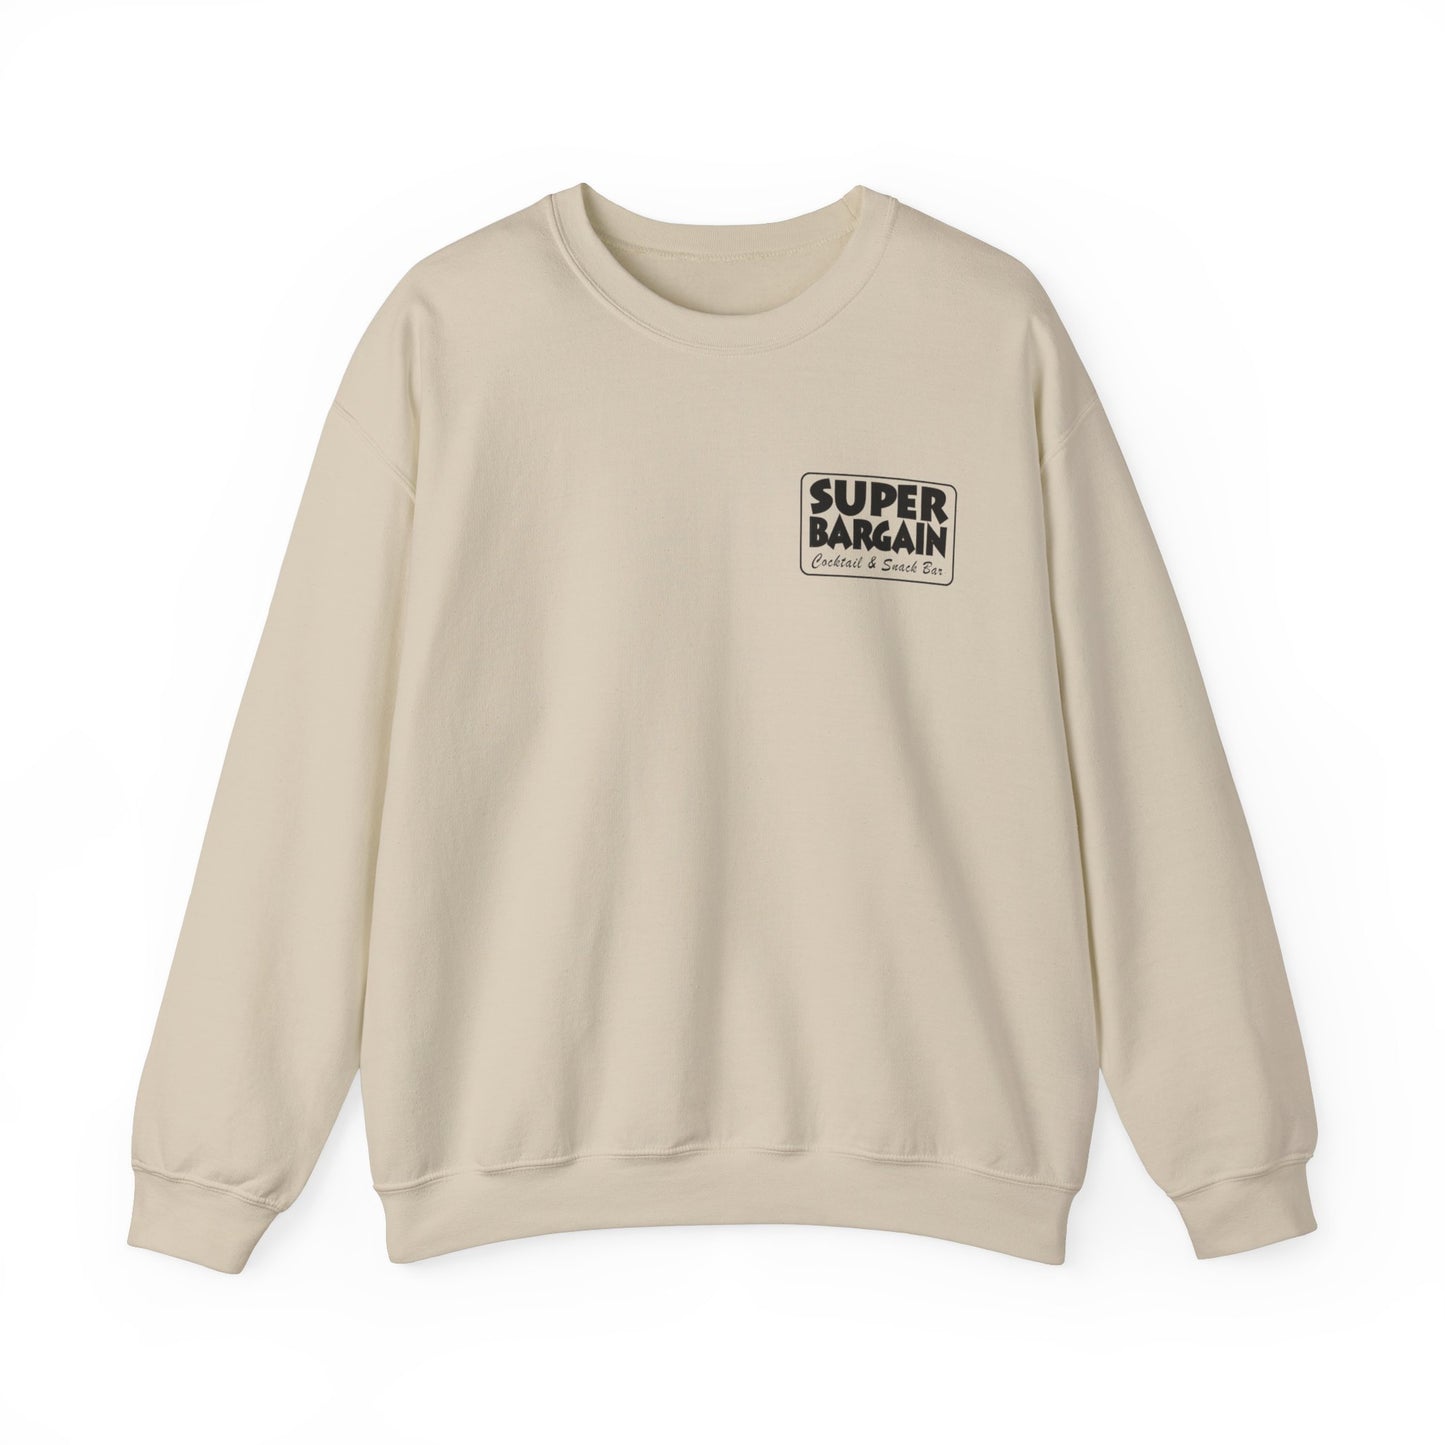 A beige Unisex Heavy Blend™ Crewneck Monochrome Logo and Cabbagetown sweatshirt with long sleeves, displayed flat with a black square logo featuring the text "SUPER BARGAIN" on the chest. The background is plain white, subtly evoking the urban vibes of Toronto's Cabbagetown.